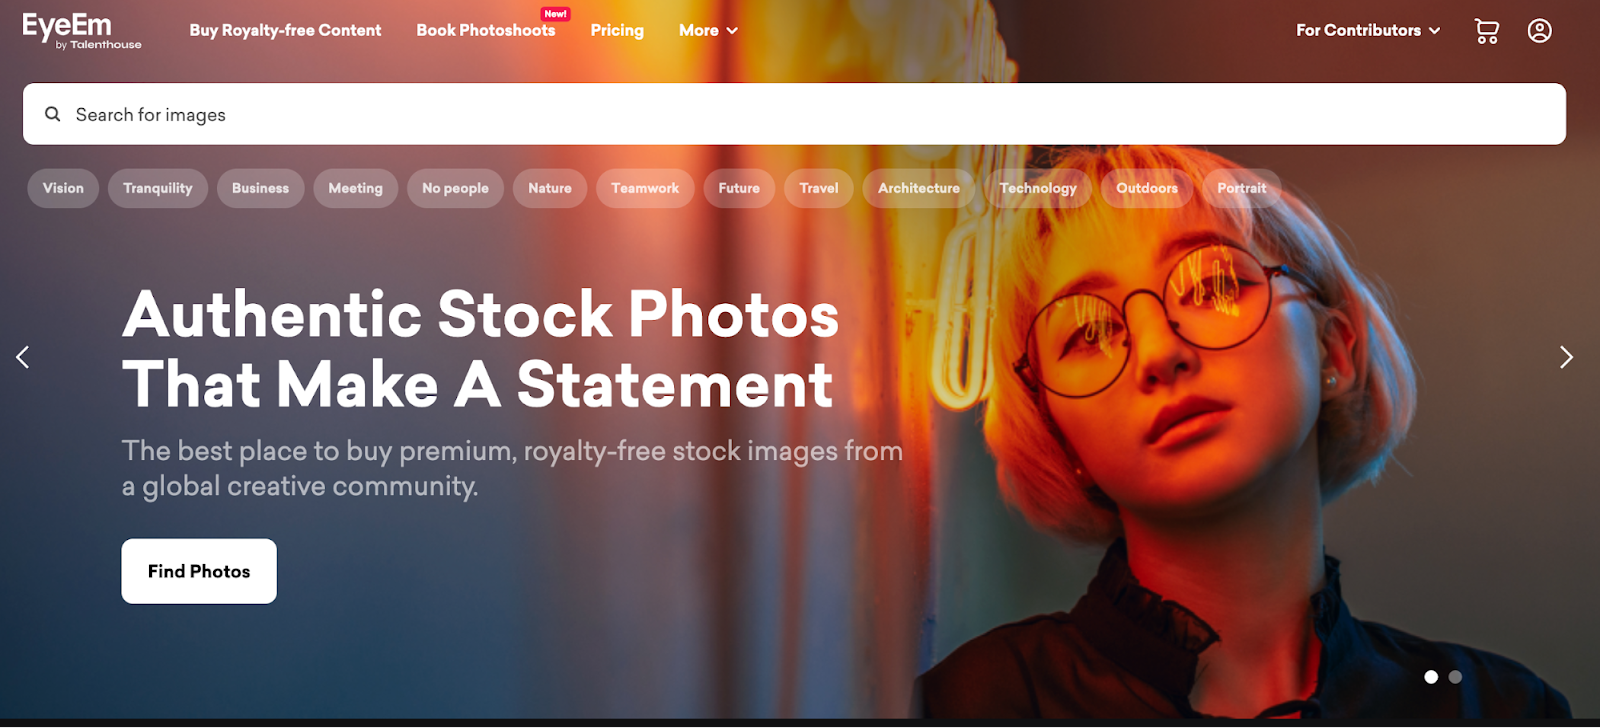 EyeEm website featuring a search bar for images and a message about the product overlaid on an artistic portrait of a person under neon lighting.